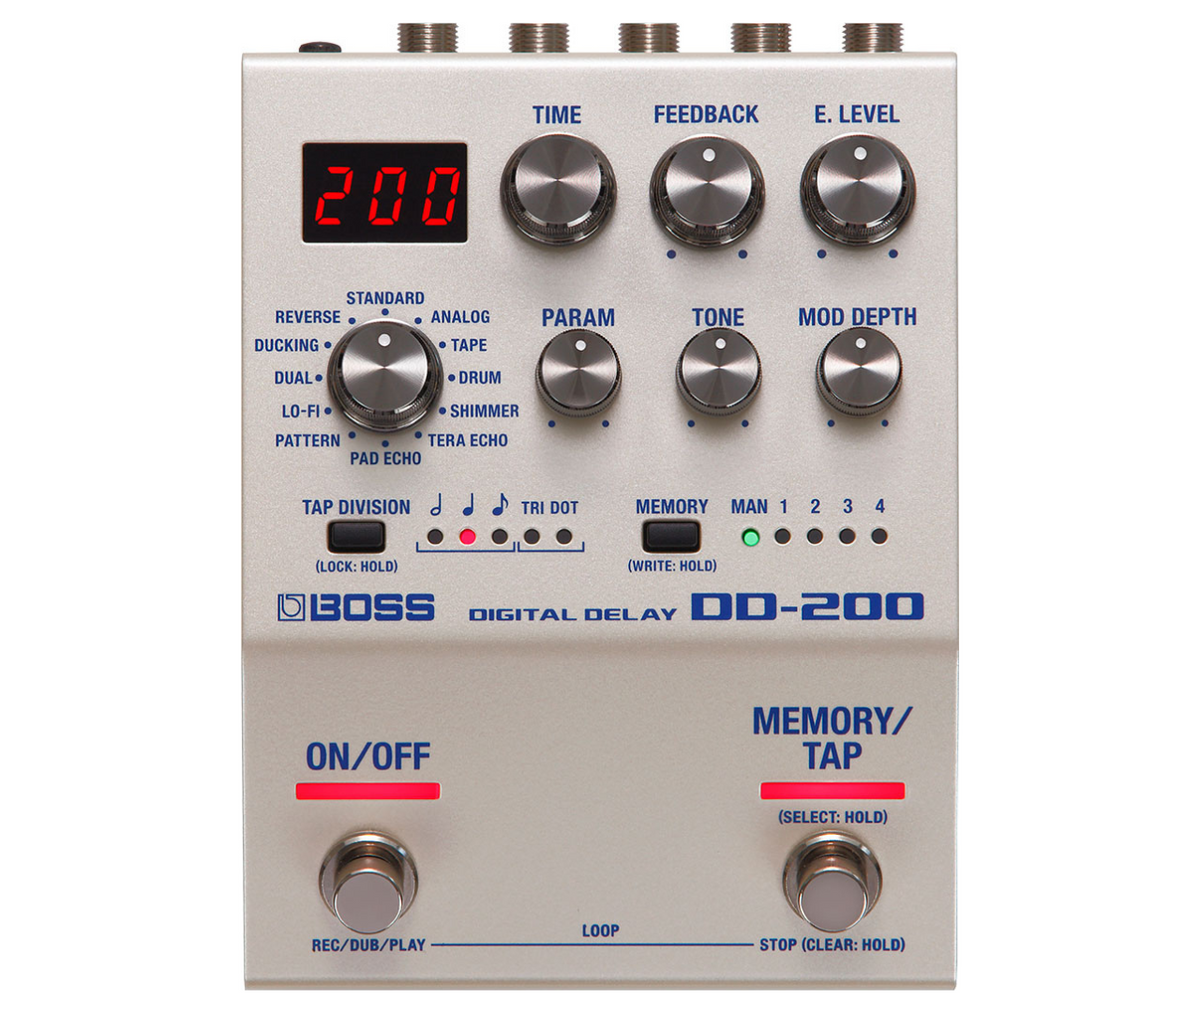 BOSS DD-200 Digital Delay Best Guitar Effects Pedal with 12 Delay Modes Modern Digital to Classic Analog